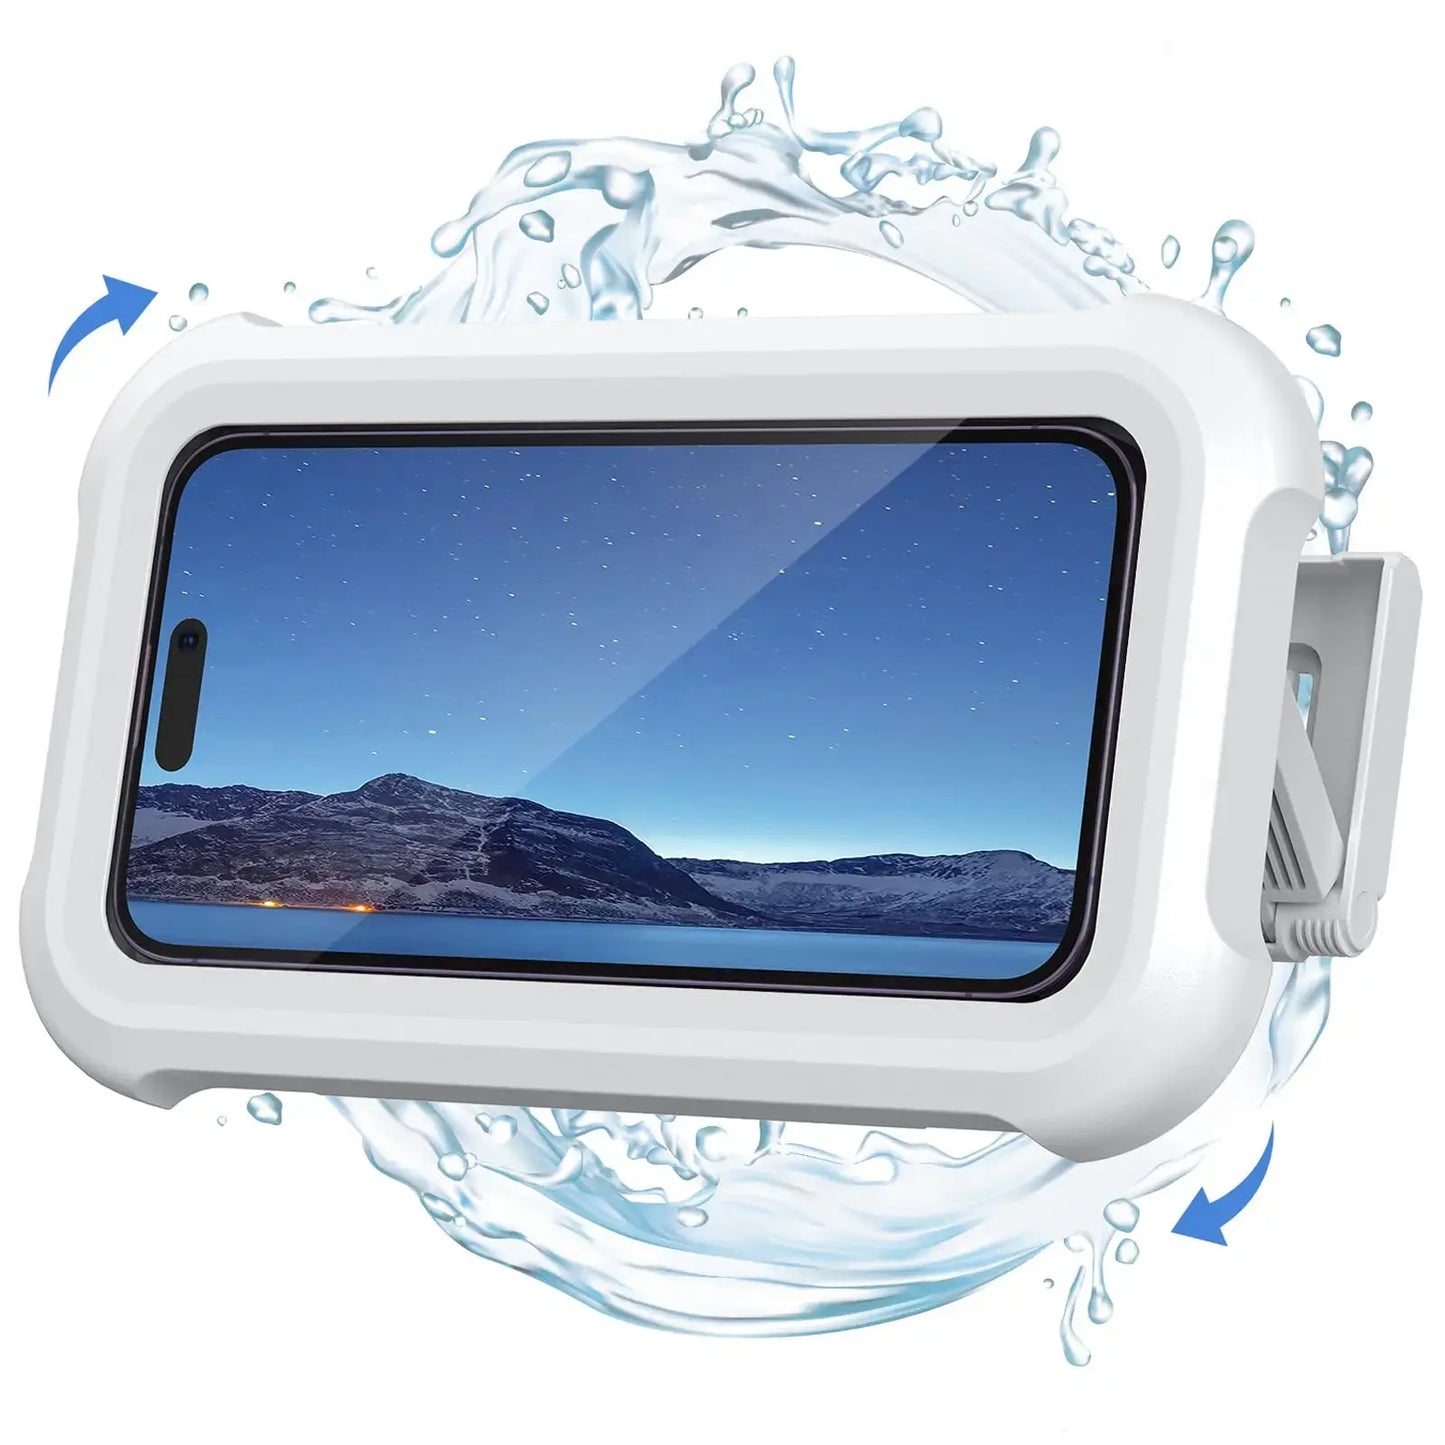 AmoorCity Waterproof Phone Holder. Universal waterproof phone pouch with clear touch-friendly material. Protects phone from water, sand, and snow. Perfect for beach, pool, boating, and other water activities.